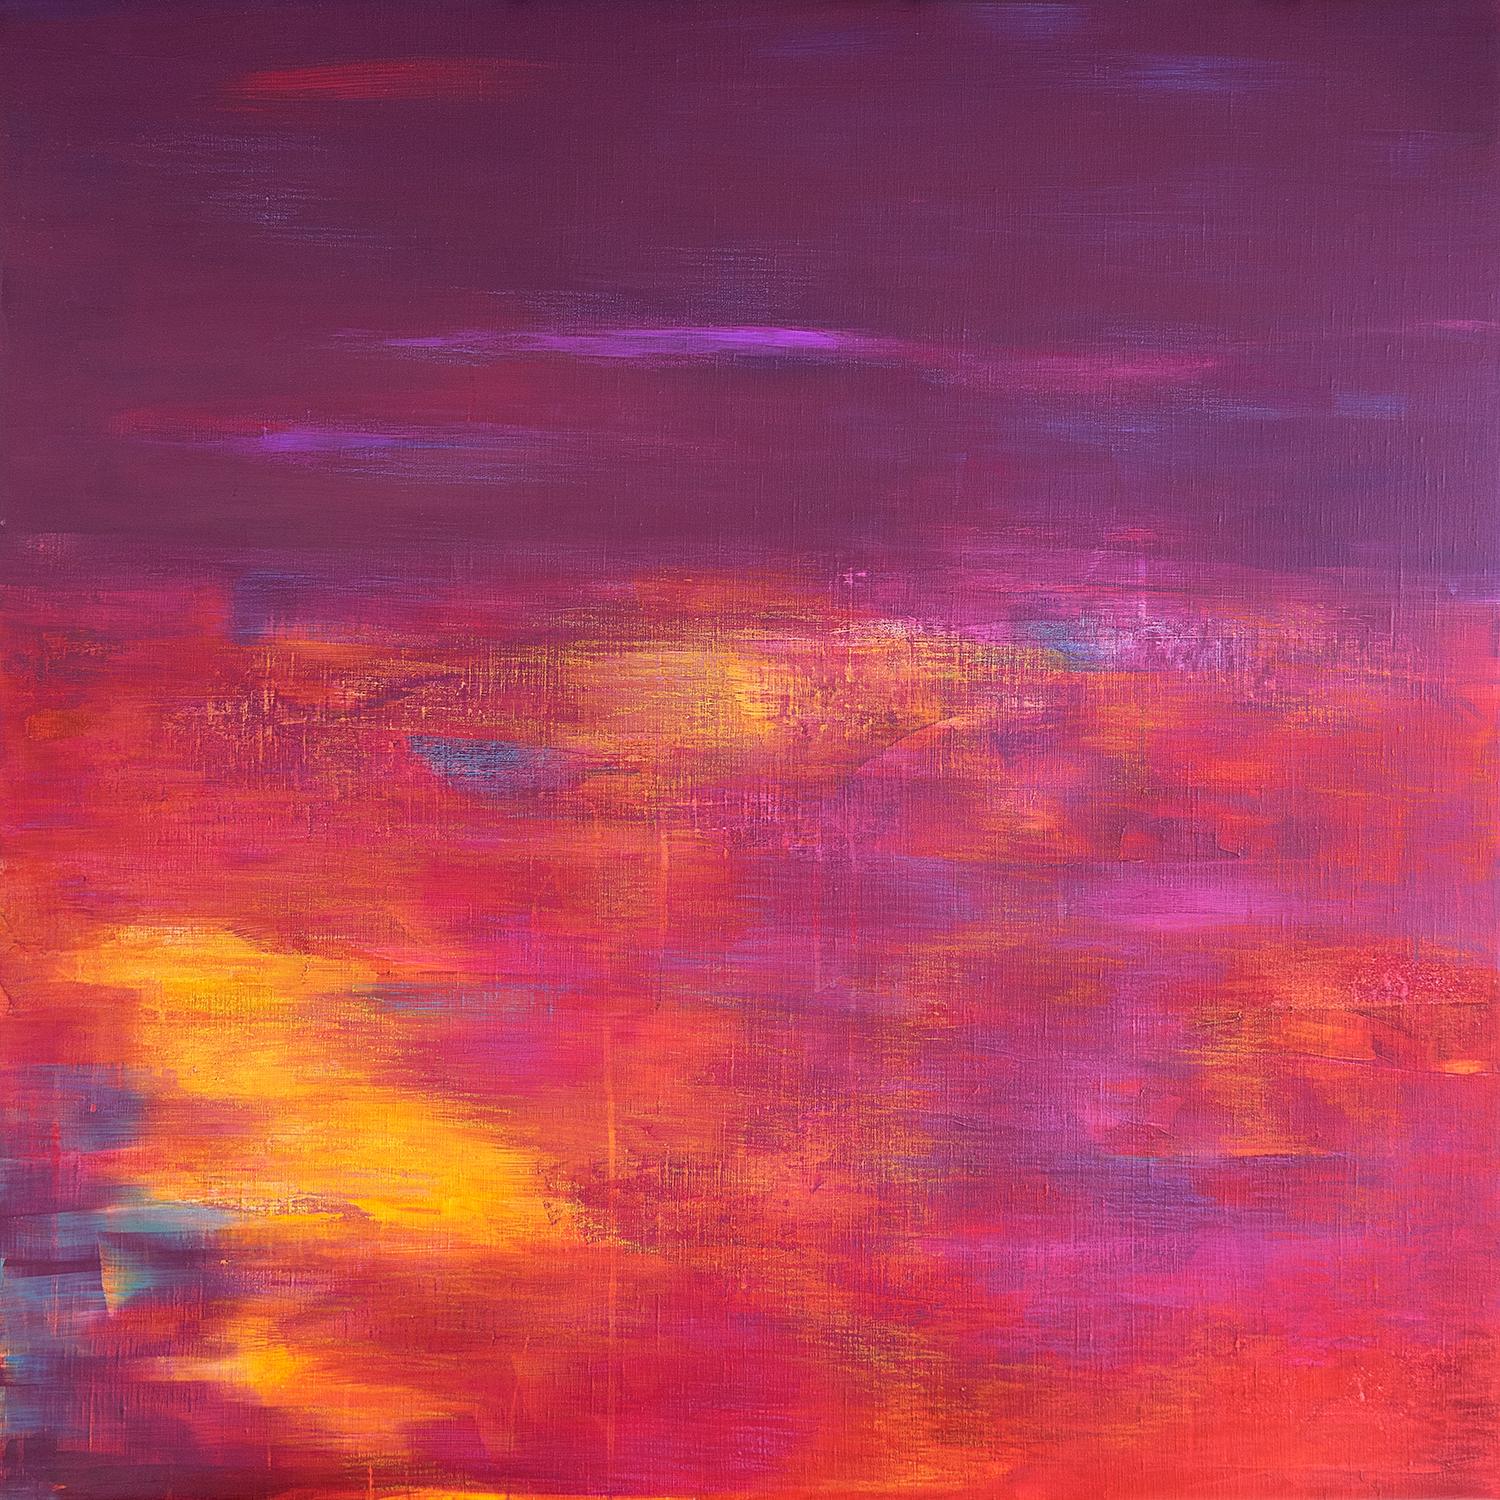 Place of inner power 1. Colorful bright Abstract Painting 90x90cm by Anna Selina